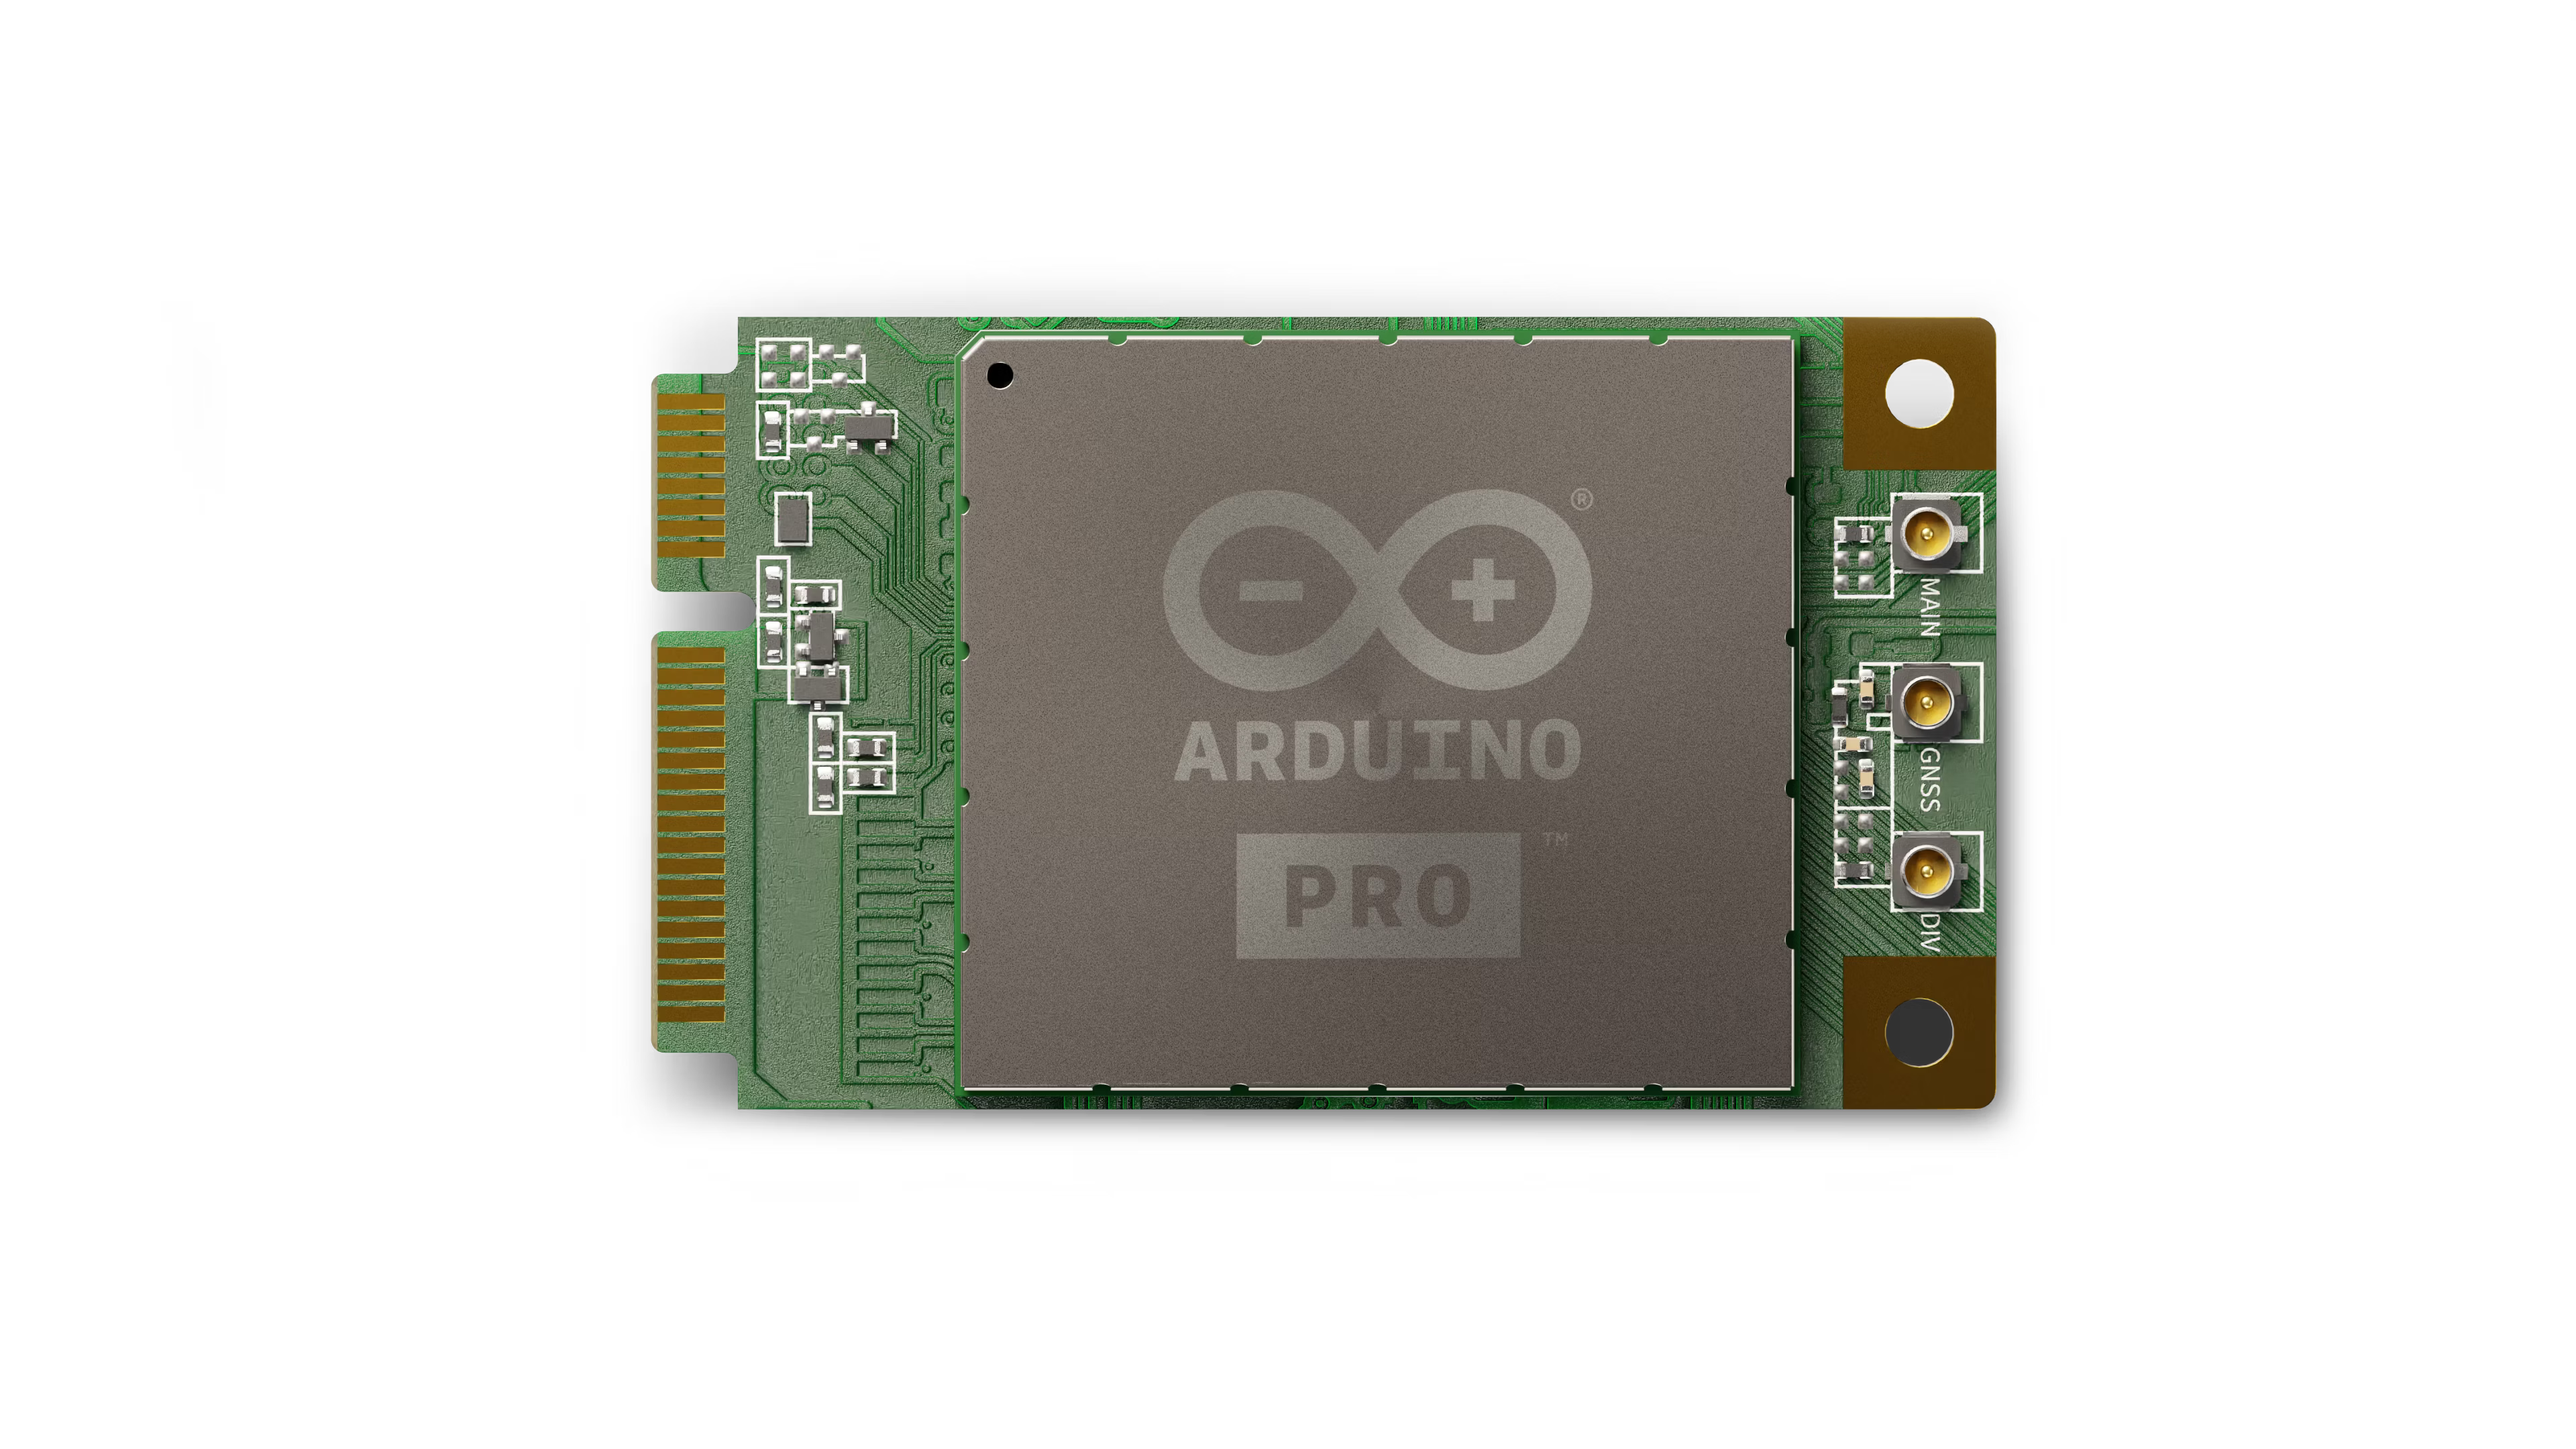 Arduino Introduces 4G Global Connectivity for Portenta in Mini-PCIe Form Factor